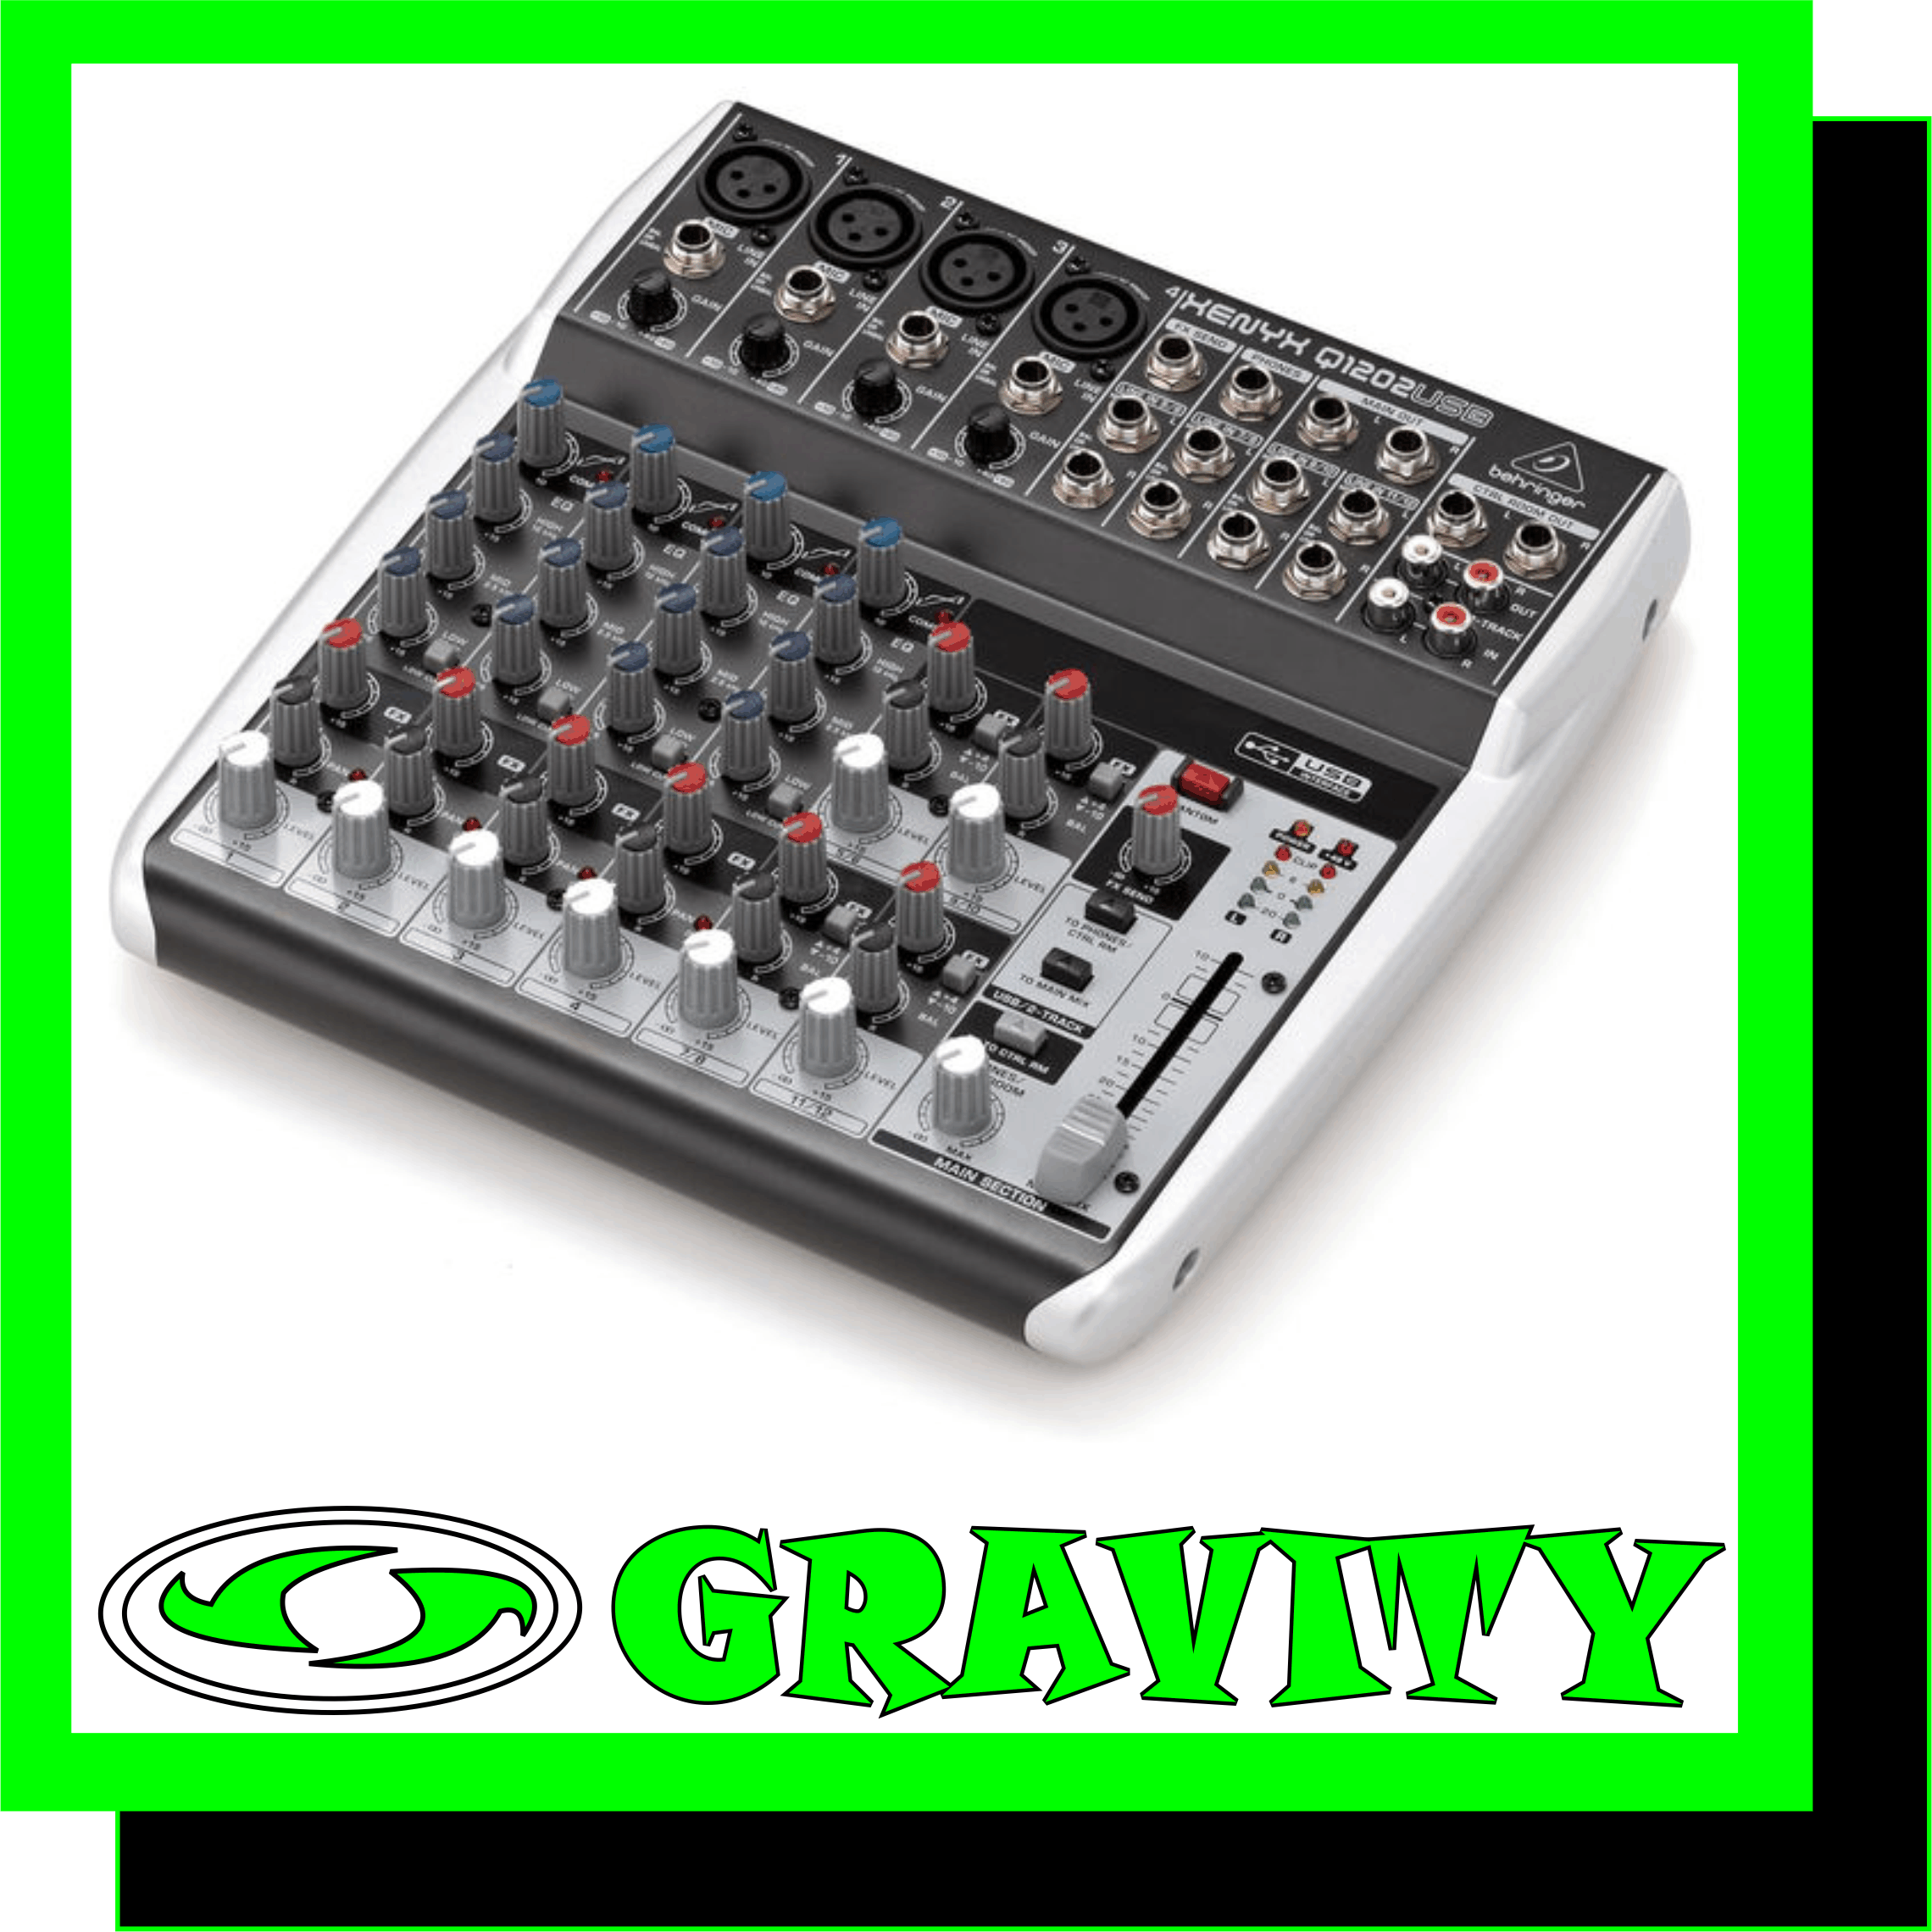  XENYX Q1202USB Premium 12-Input 2-Bus Mixer with XENYX Mic Preamps & Compressors, British EQs and USB/Audio Interface  Product Features: -Premium ultra-low noise, high headroom analog mixer -4 state-of-the-art XENYX Mic Preamps comparable to stand-alone boutique preamps -Studio-grade compressors with super-easy “one-knob” functionality and control LED for professional vocal and instrumental sound -Built-in stereo USB/Audio Interface to connect directly to your computer. Free audio recording, editing and podcasting software plus 150 instrument/effect plug-ins   downloadable at behringer.com -Neo-classic “British” 3-band EQs for warm and musical sound -1 post fader FX send per channel for external FX devices -Main mix outputs plus separate control room, phones and 2-Track outputs -2-Track inputs assignable to main mix or control room/phones outputs -FX to control room function helps to monitor effect signal via headphones and control room outputs -High-quality components and exceptionally rugged construction ensure long life -Conceived and designed by BEHRINGER Germany